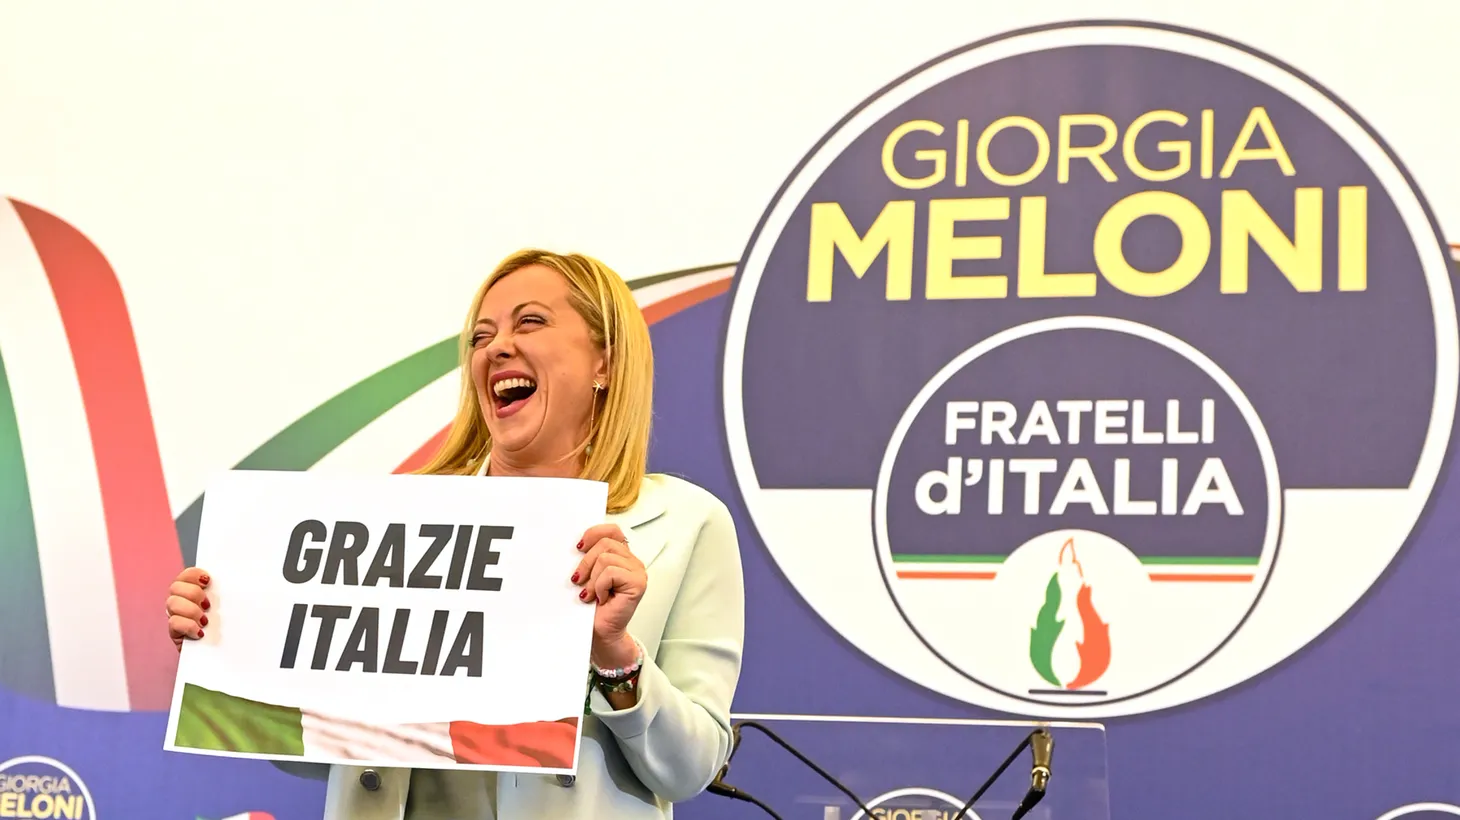 Giorgia Meloni, leader of the far-right party Brothers of Italy, holds a sign thanking voters in the Italian general election in Rome, Italy on Sept. 26, 2022.